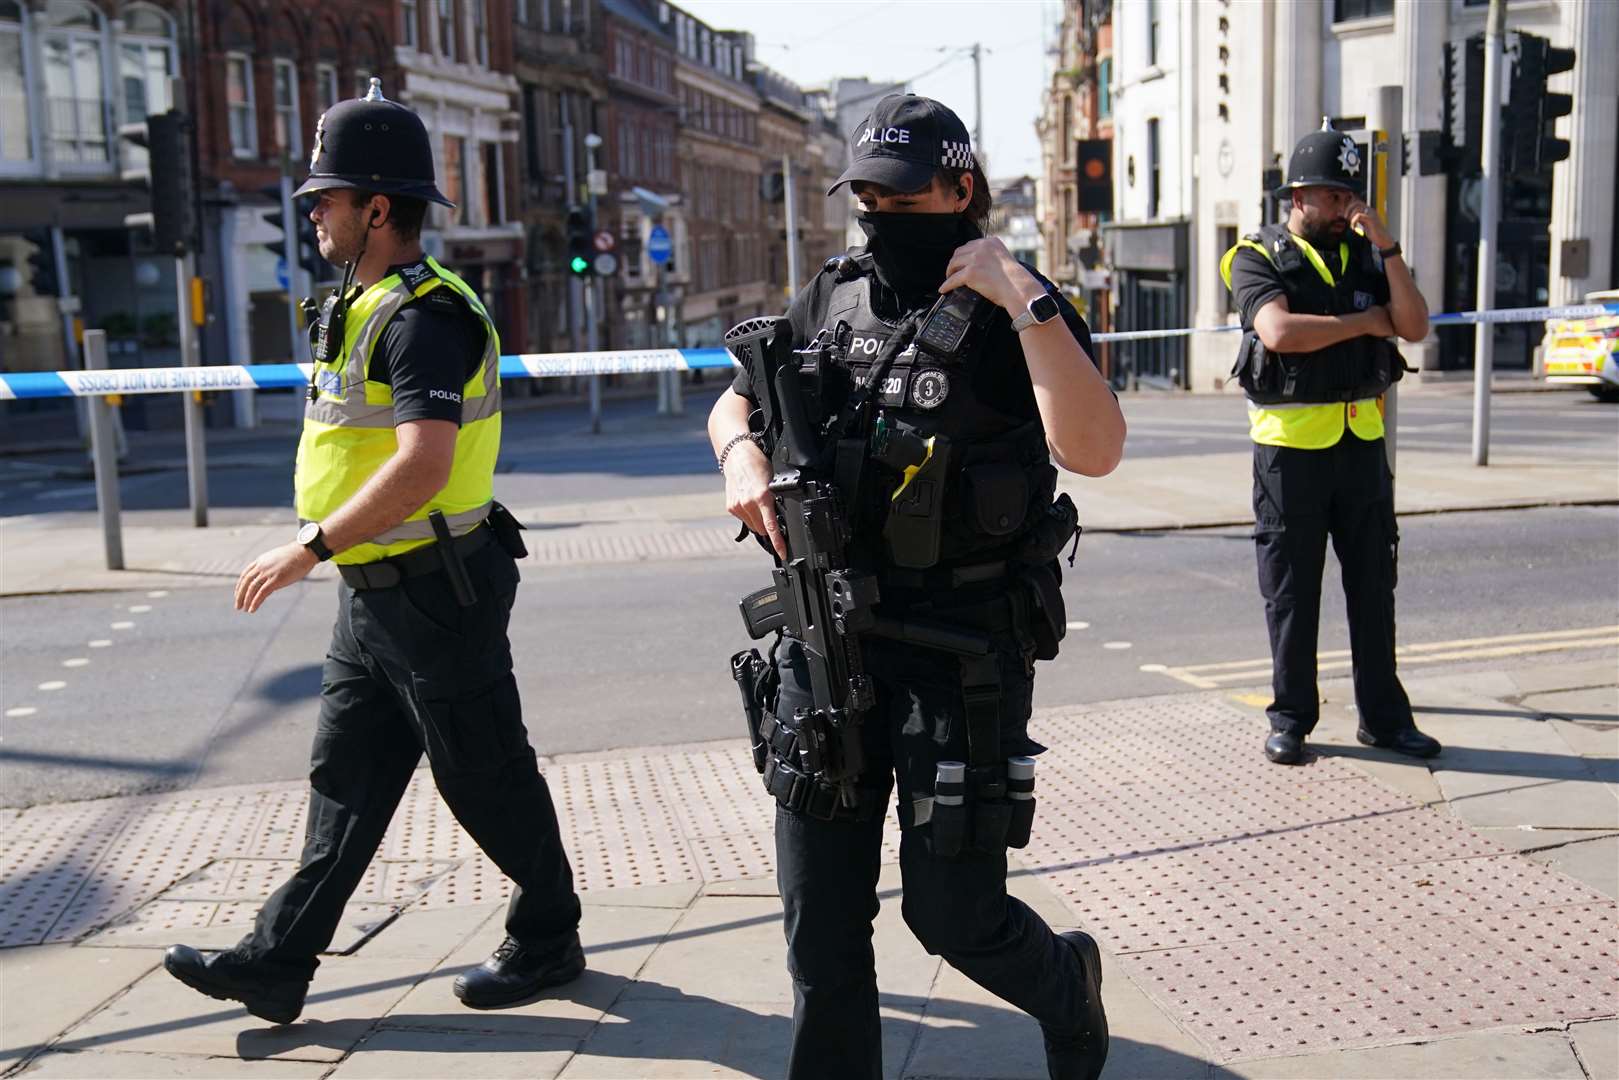 An armed police officer in Nottingham city centre on Tuesday (Jacob King/PA)